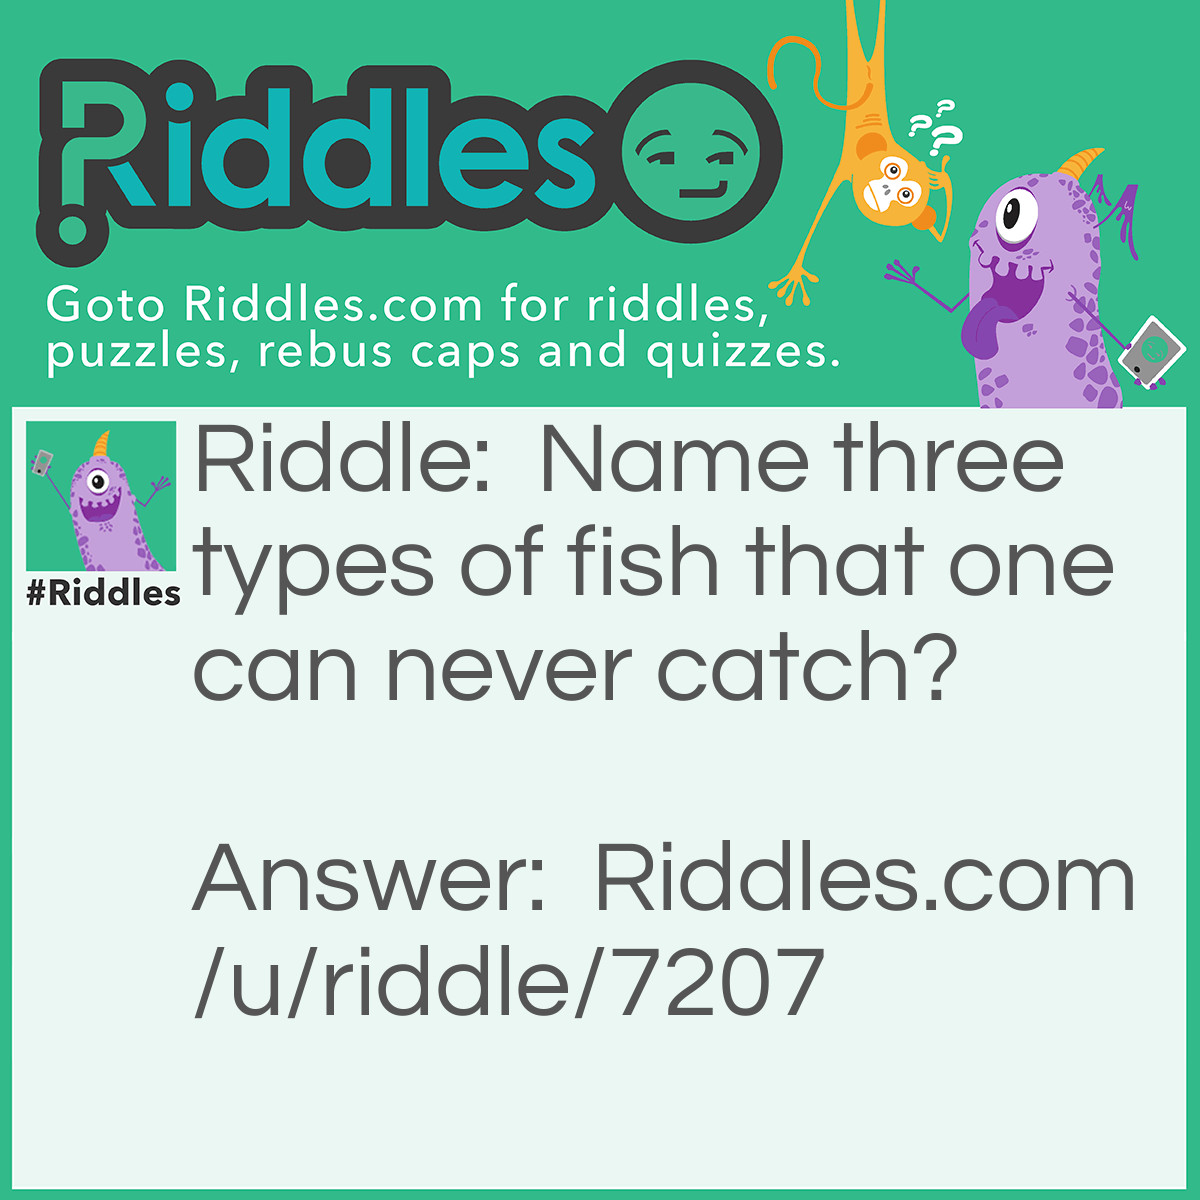 Riddle: Name three types of fish that one can never catch? Answer: Selfish, wolfish, and huffish.